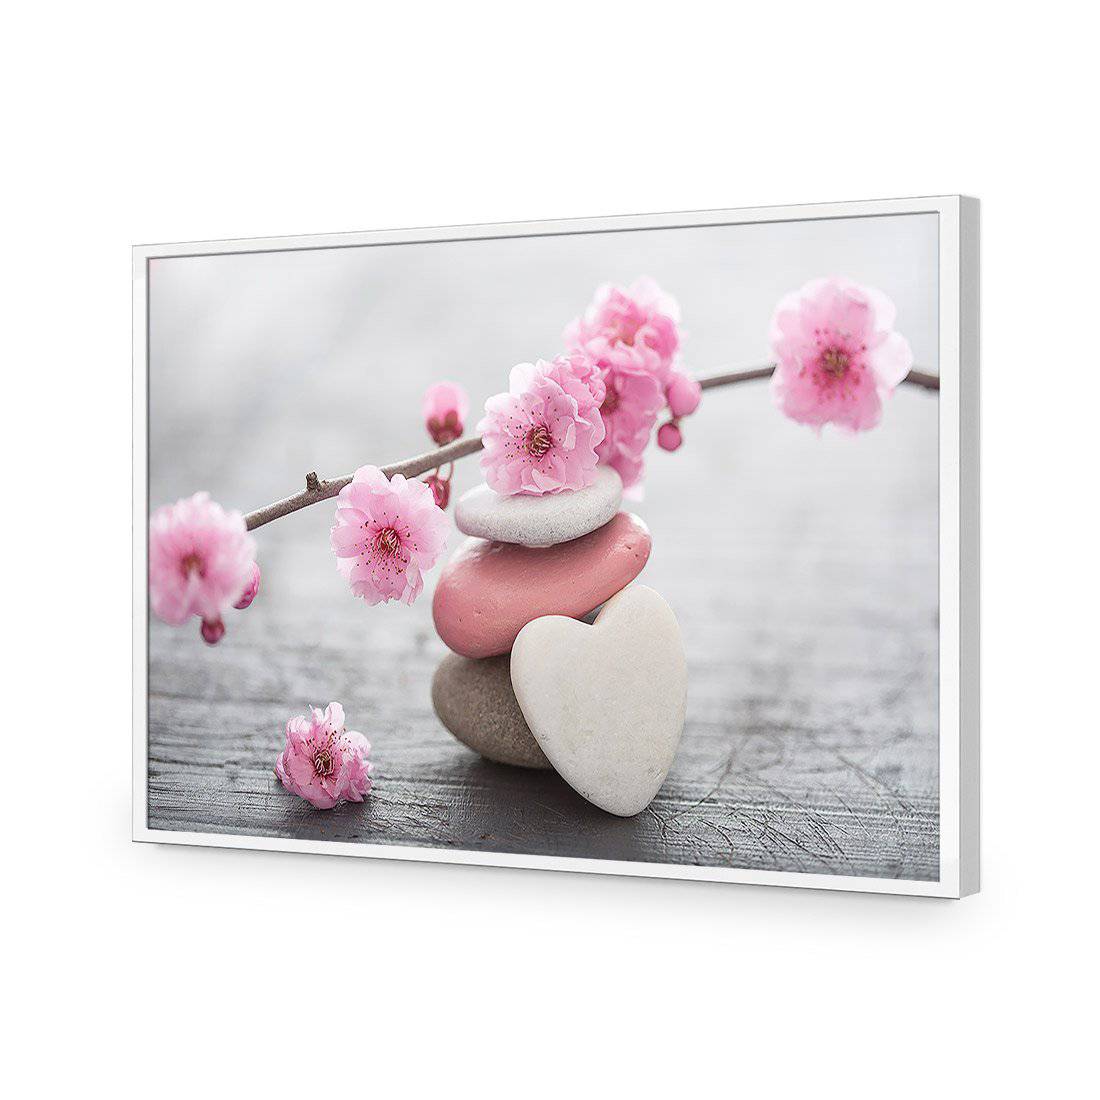 Blossom Stones-Acrylic-Wall Art Design-Without Border-Acrylic - White Frame-45x30cm-Wall Art Designs